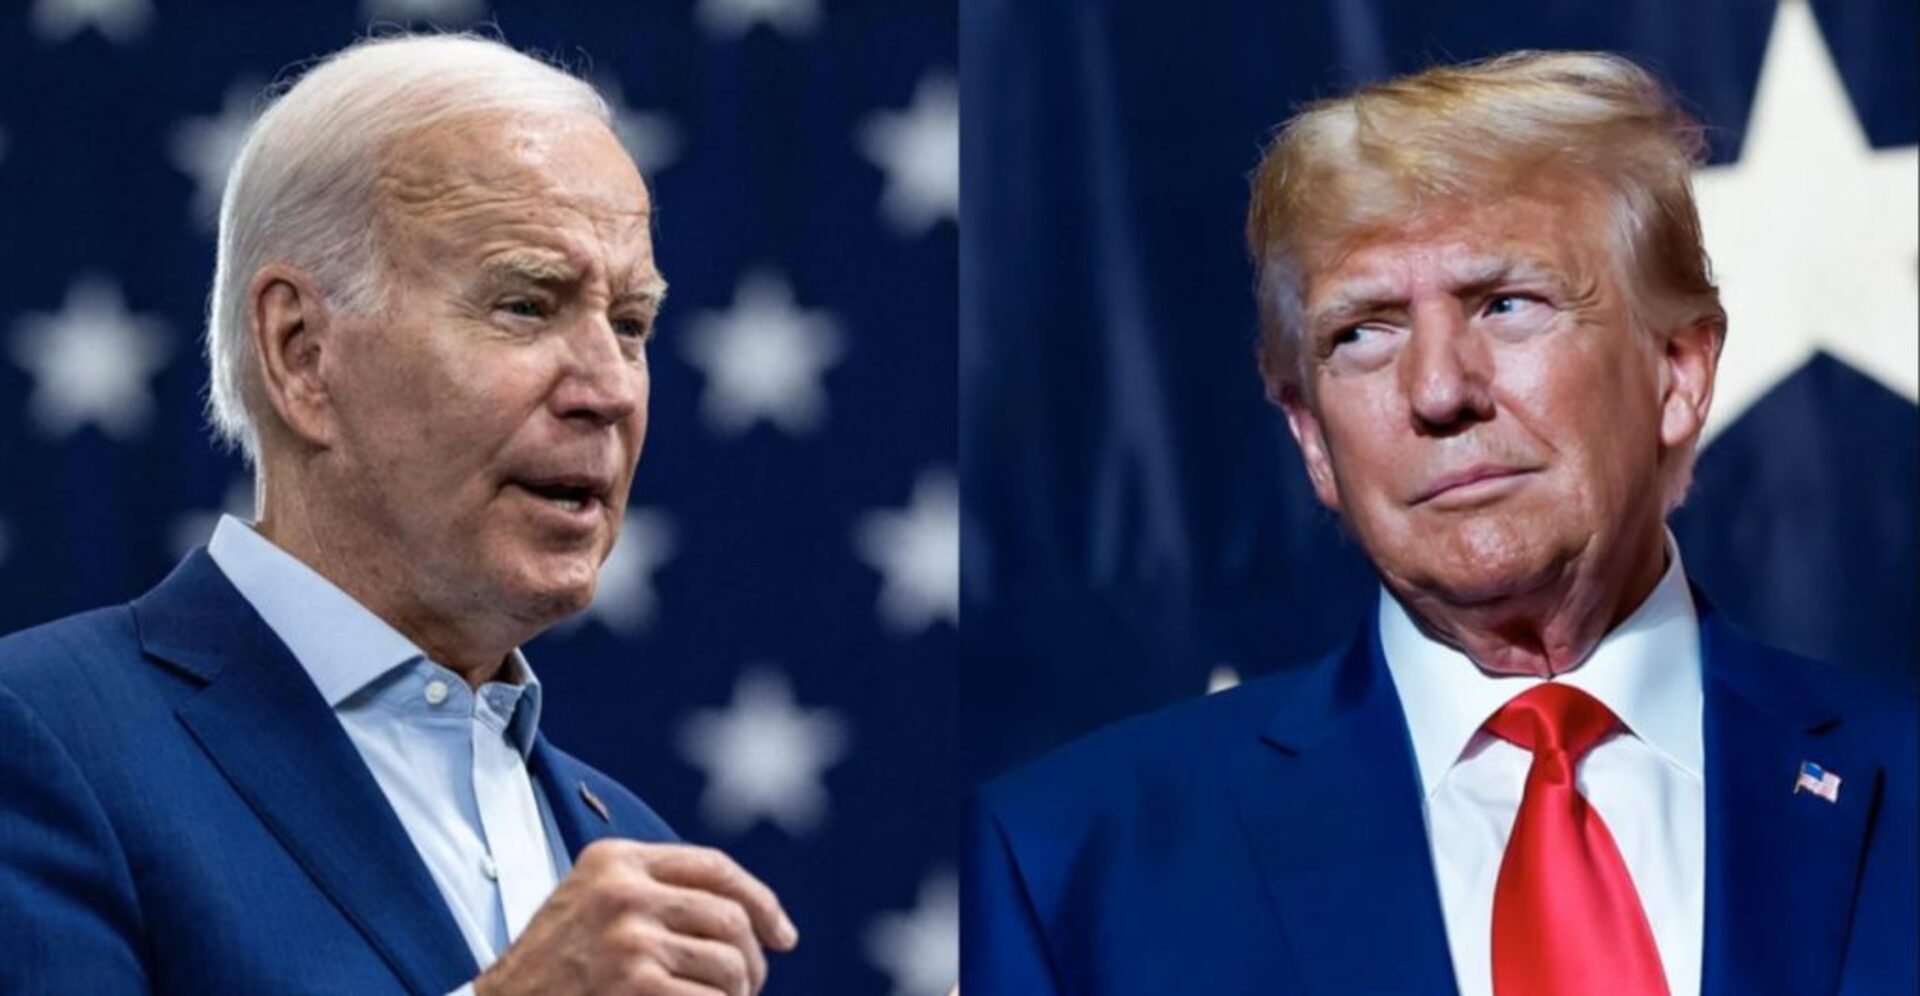 Biden and Trump: A tale of two campaigns